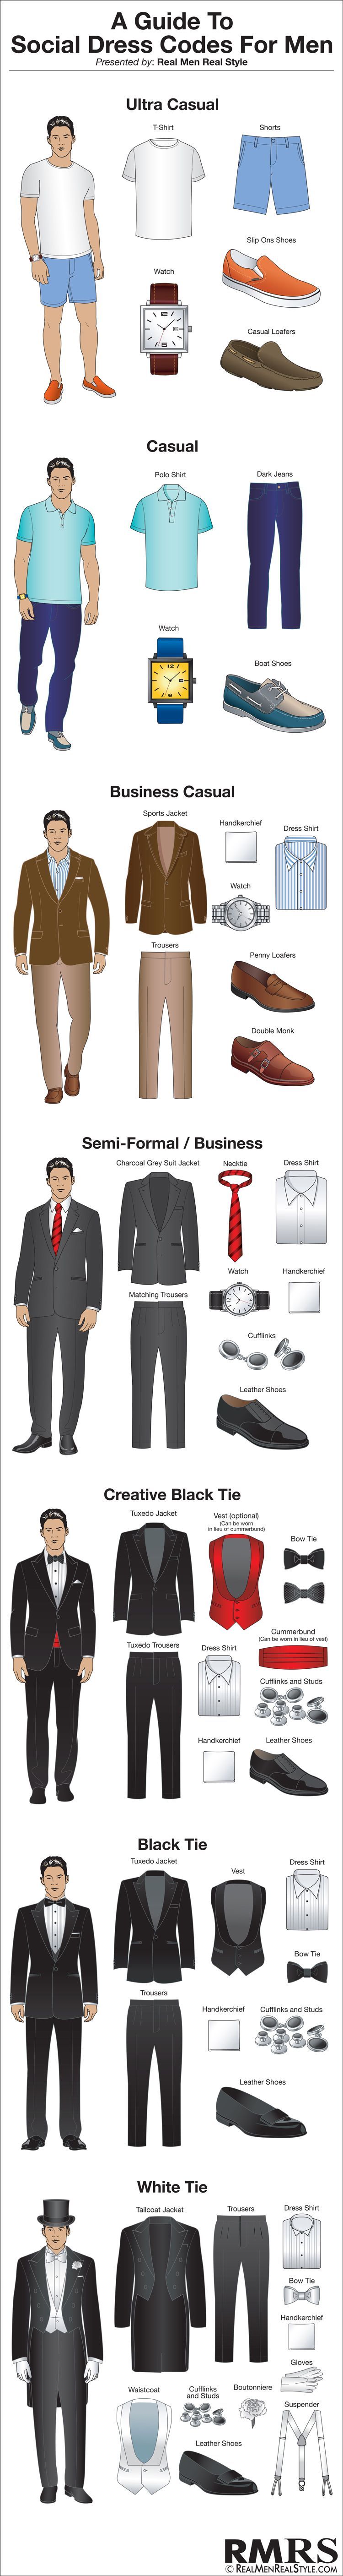 A Guide To Social Dress Codes For Men Explained.